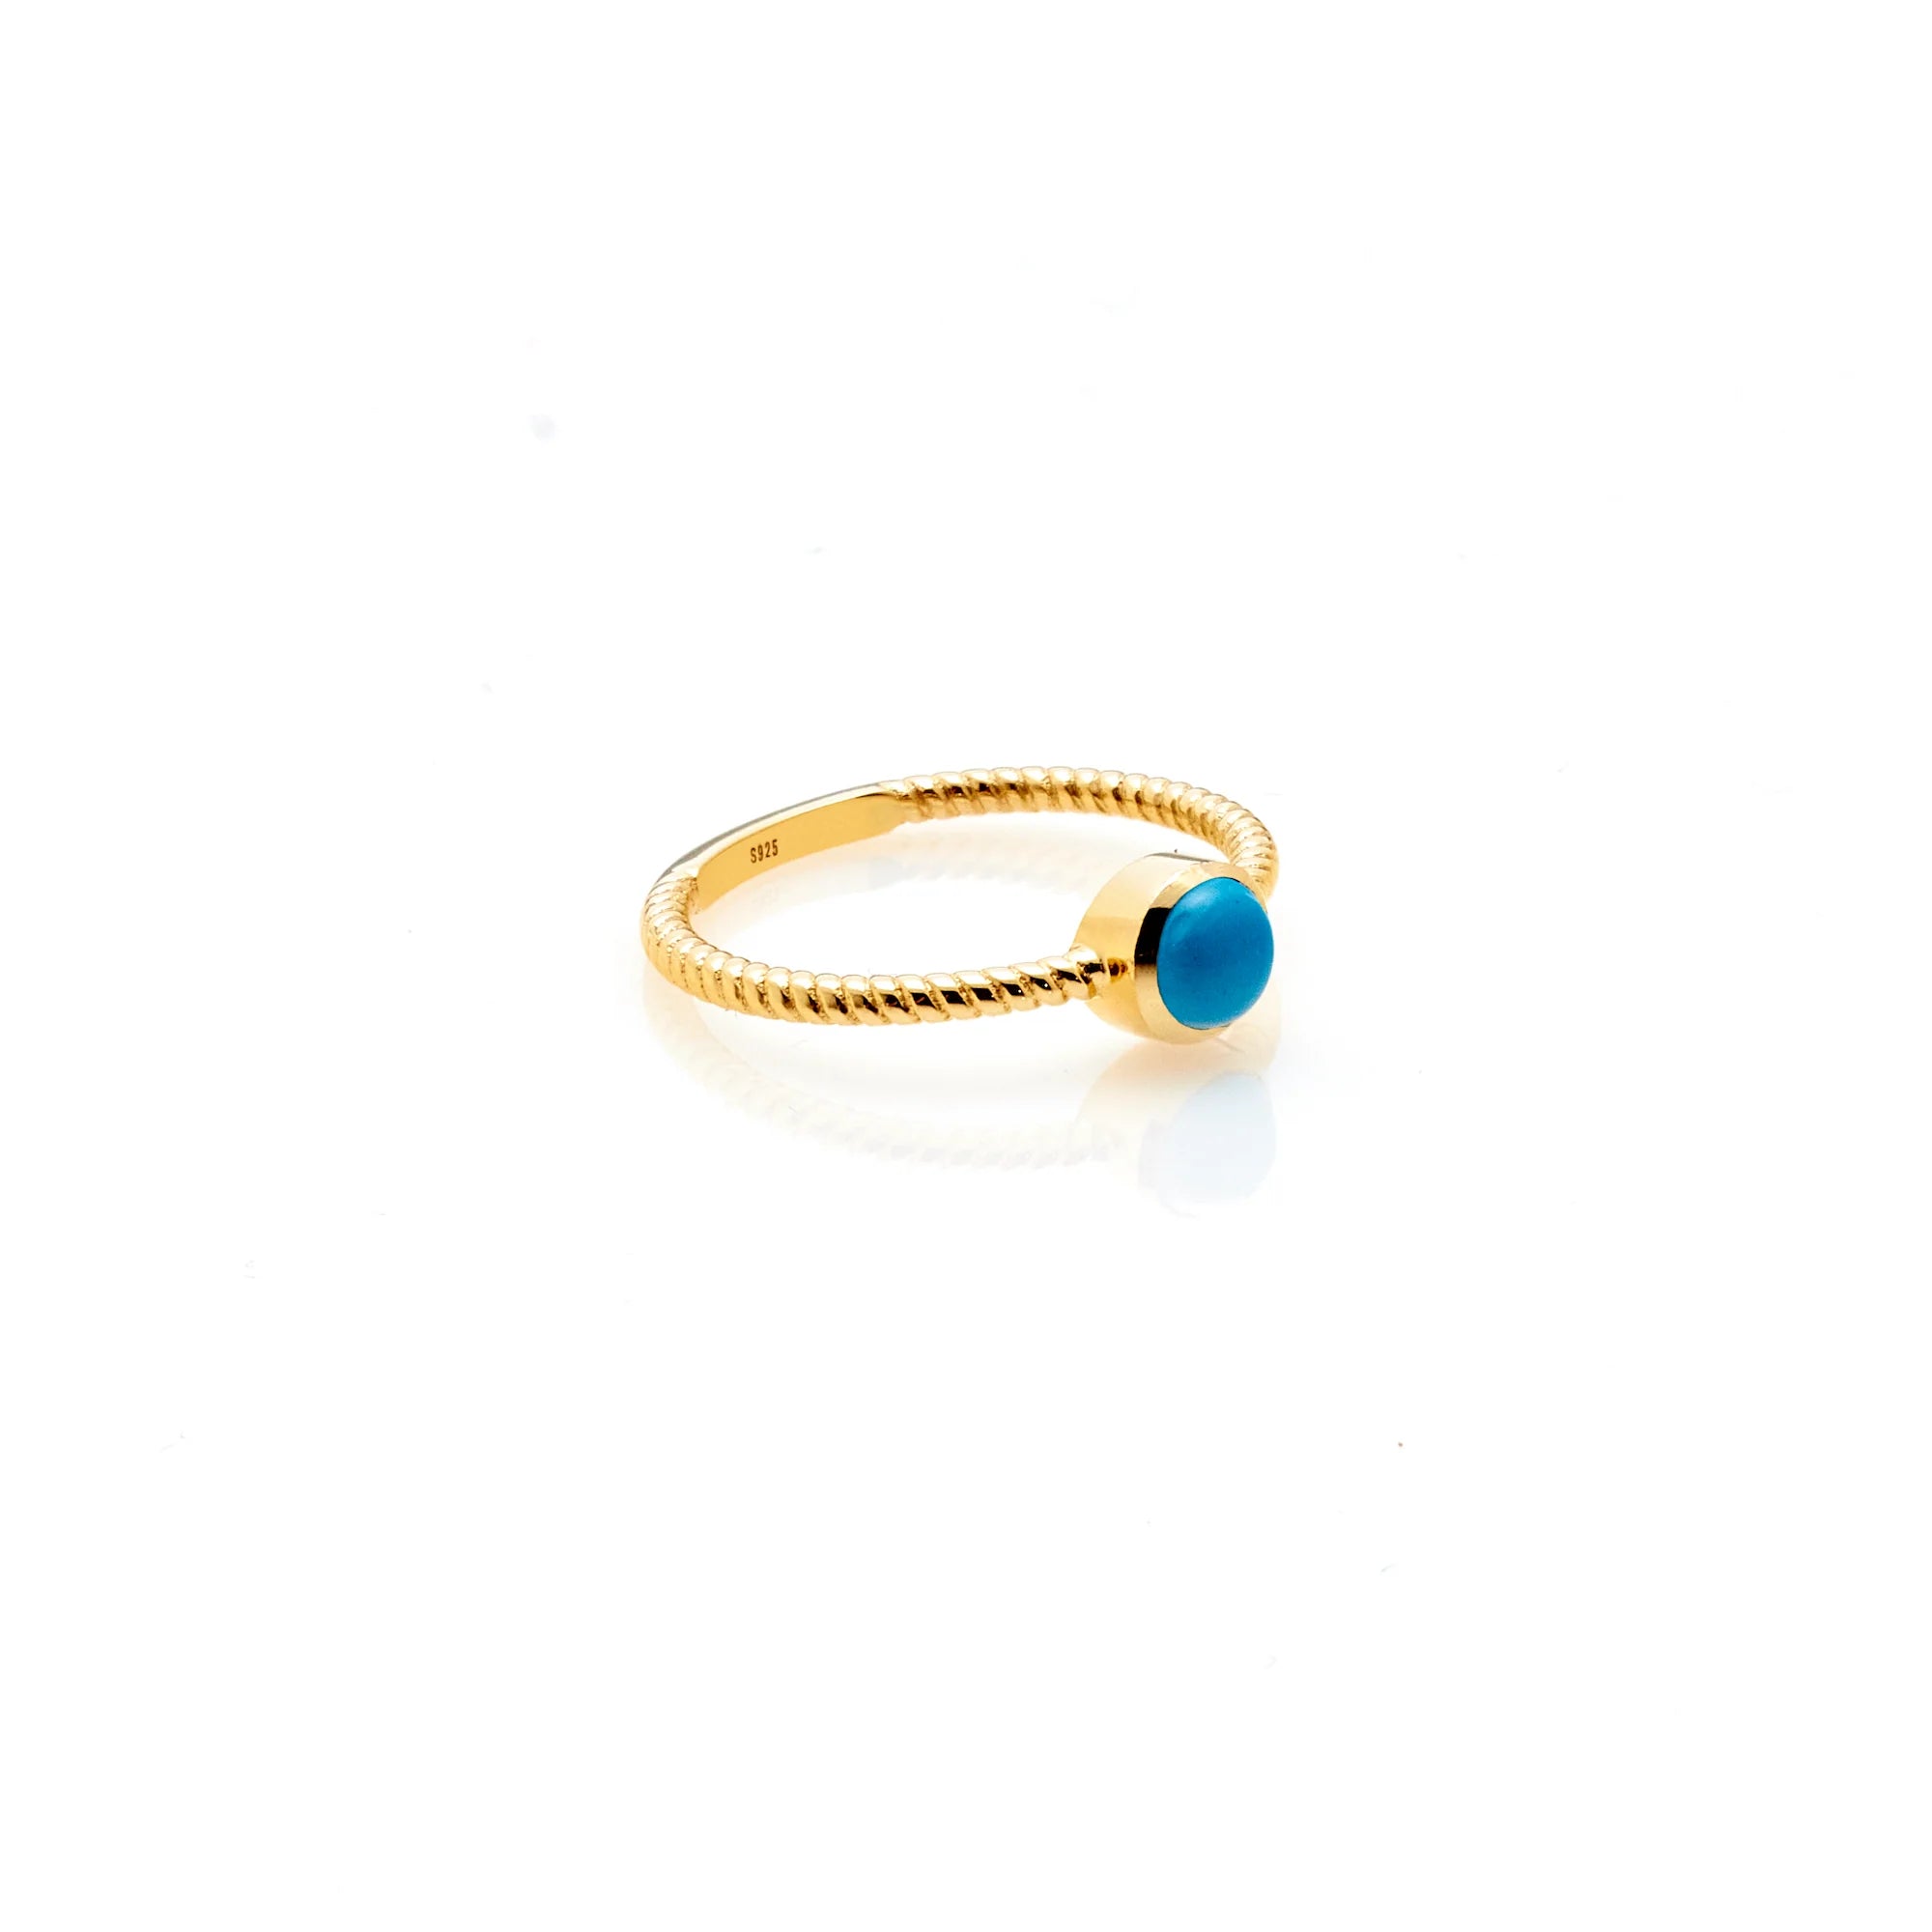 SILK & STEEL - SUPERFINE TURQUOISE ROPE RING GOLD